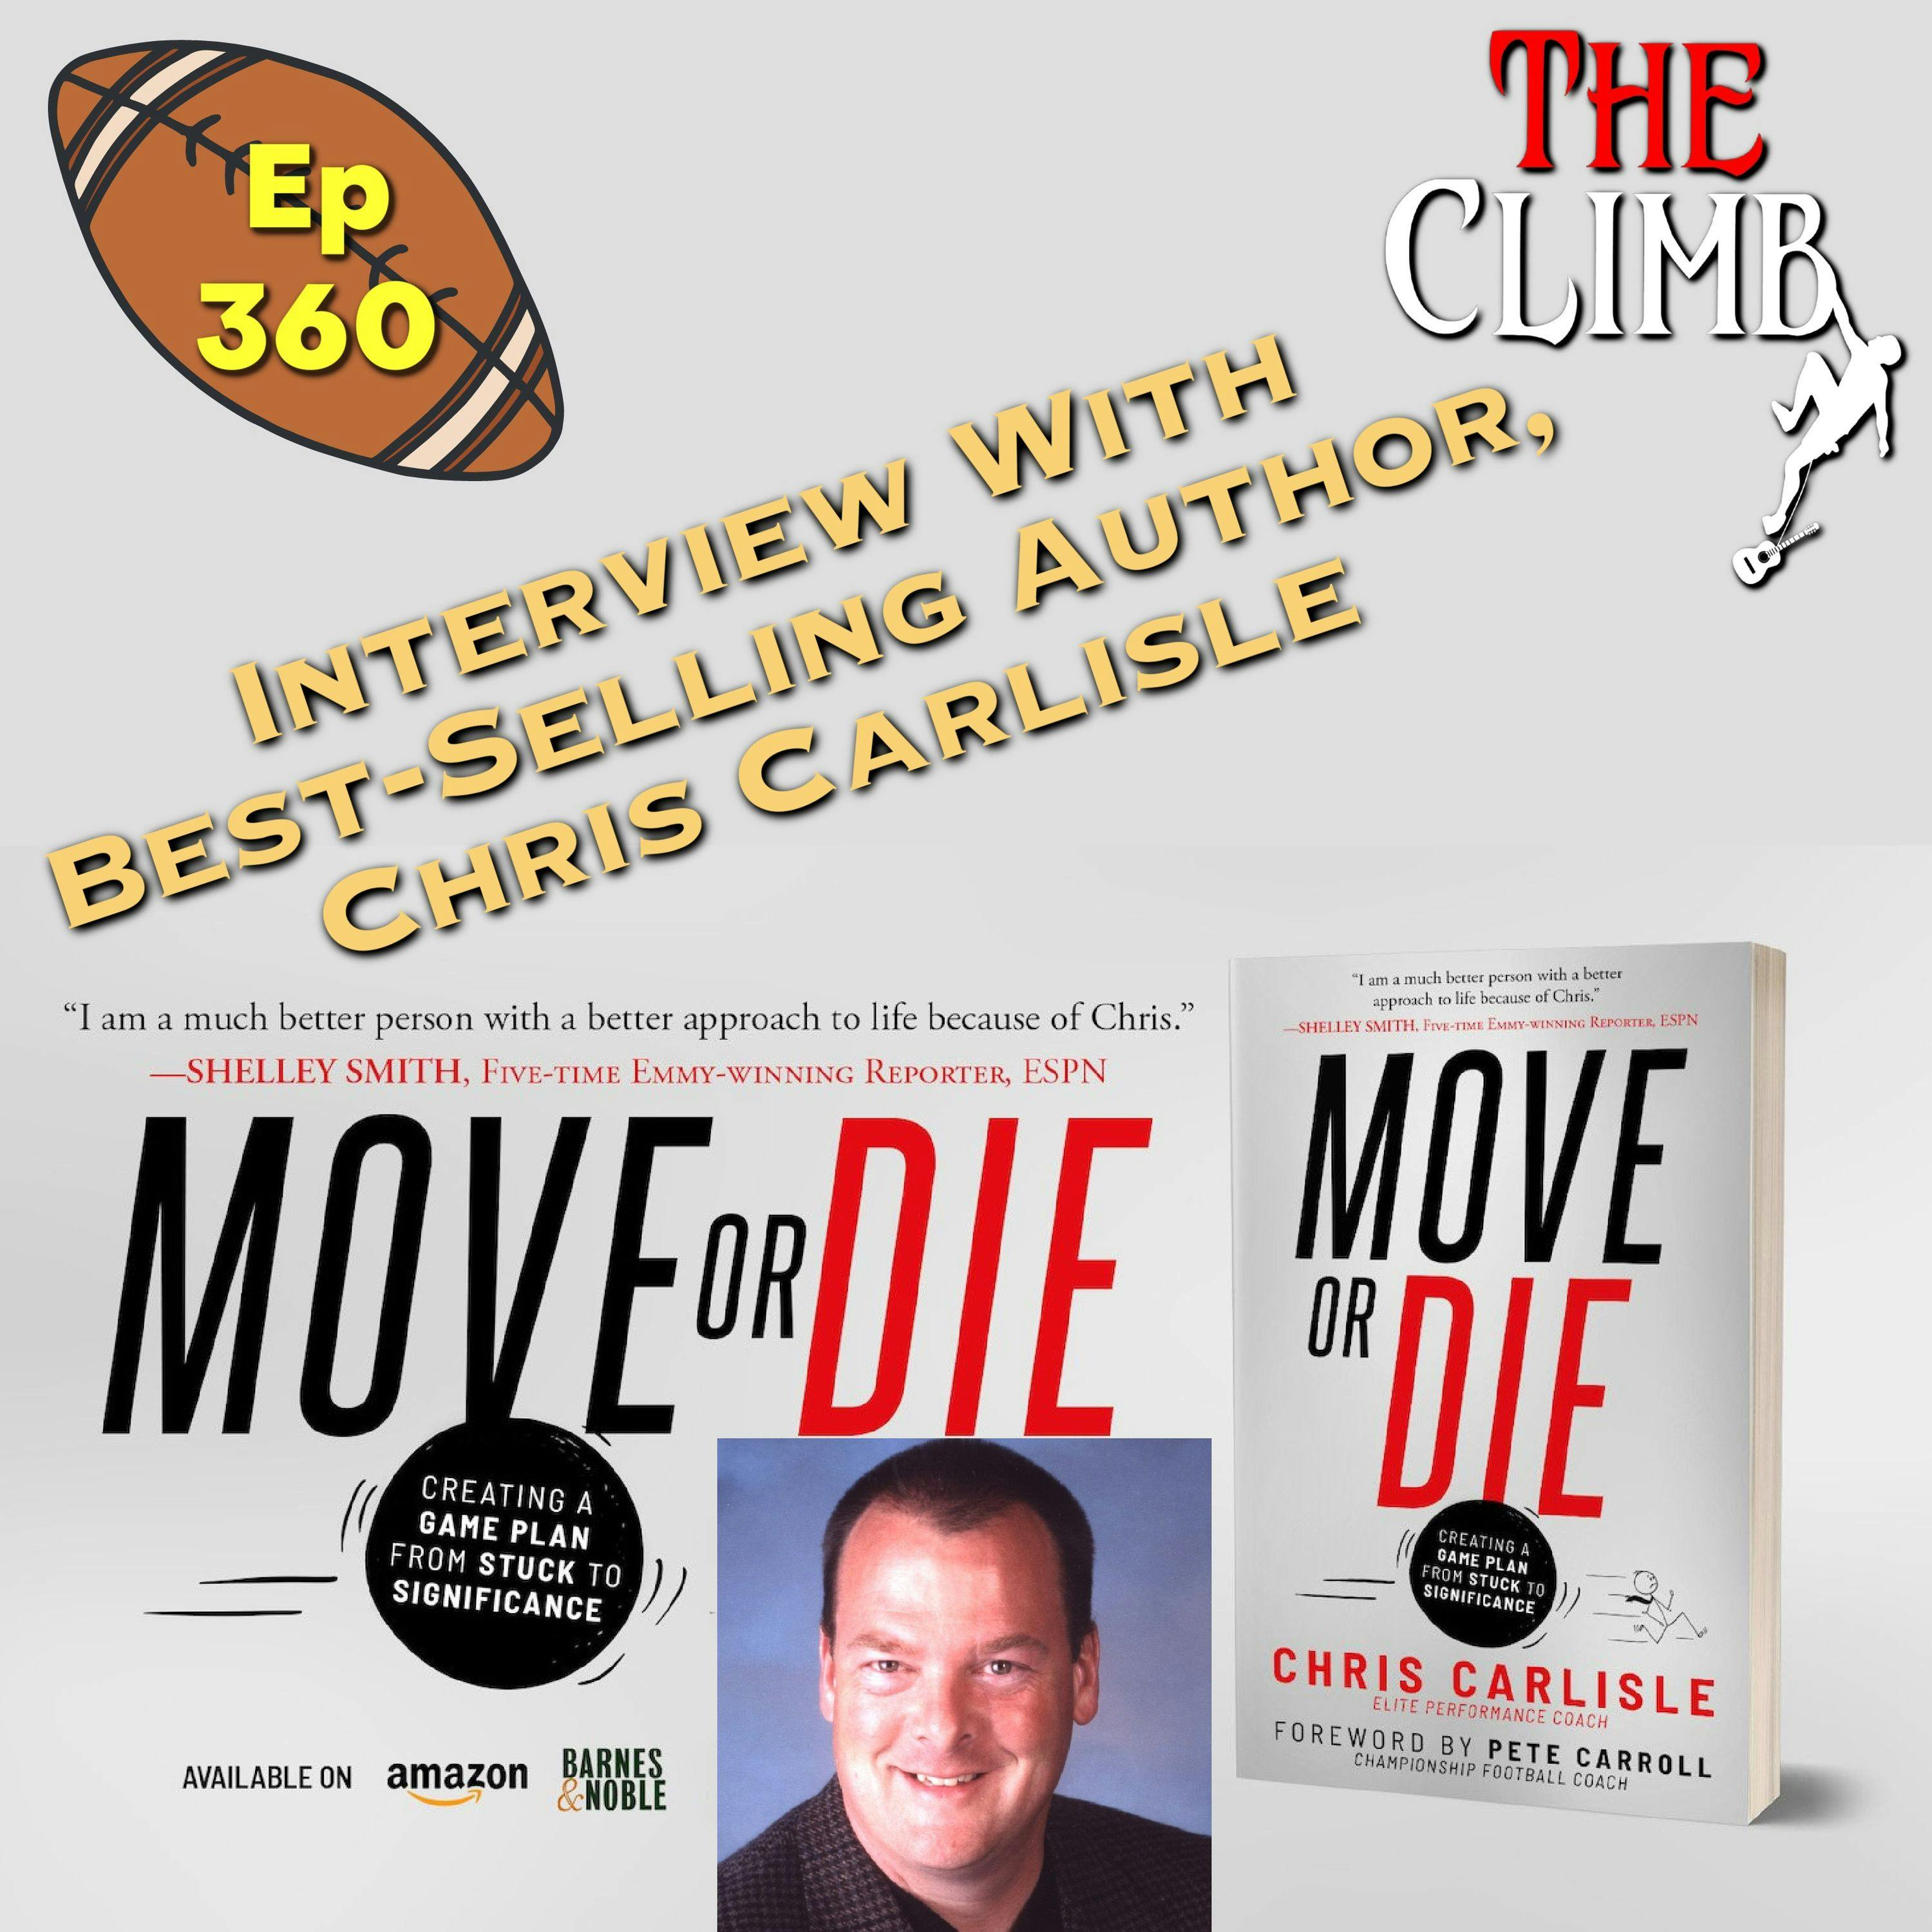 Ep 360: Interview With Best-Selling Author, Chris Carlisle